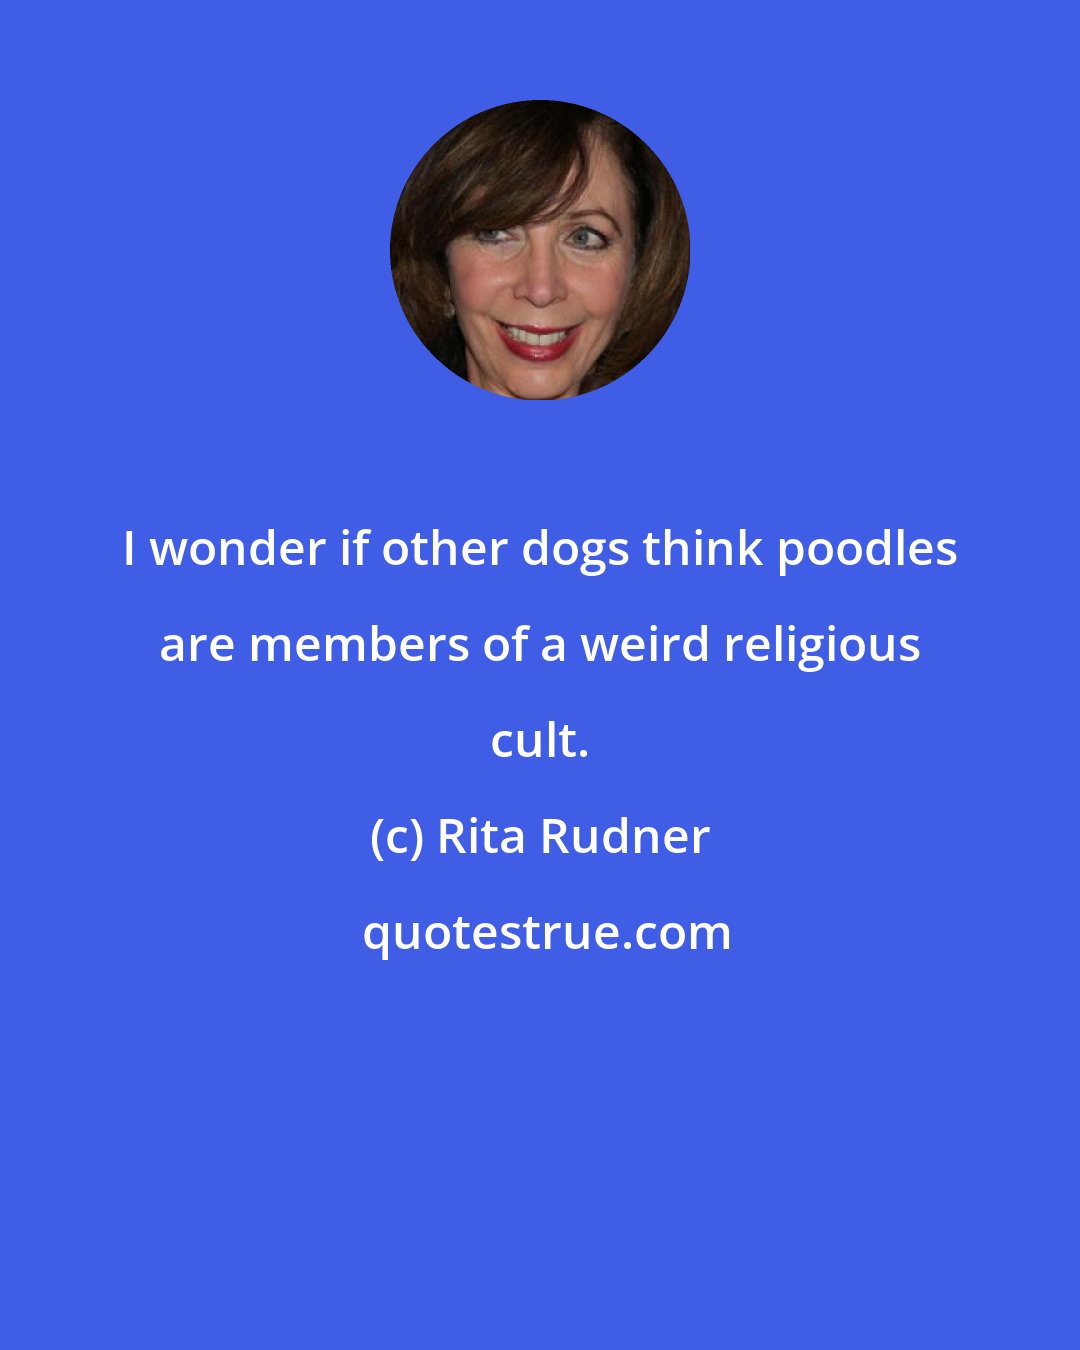 Rita Rudner: I wonder if other dogs think poodles are members of a weird religious cult.